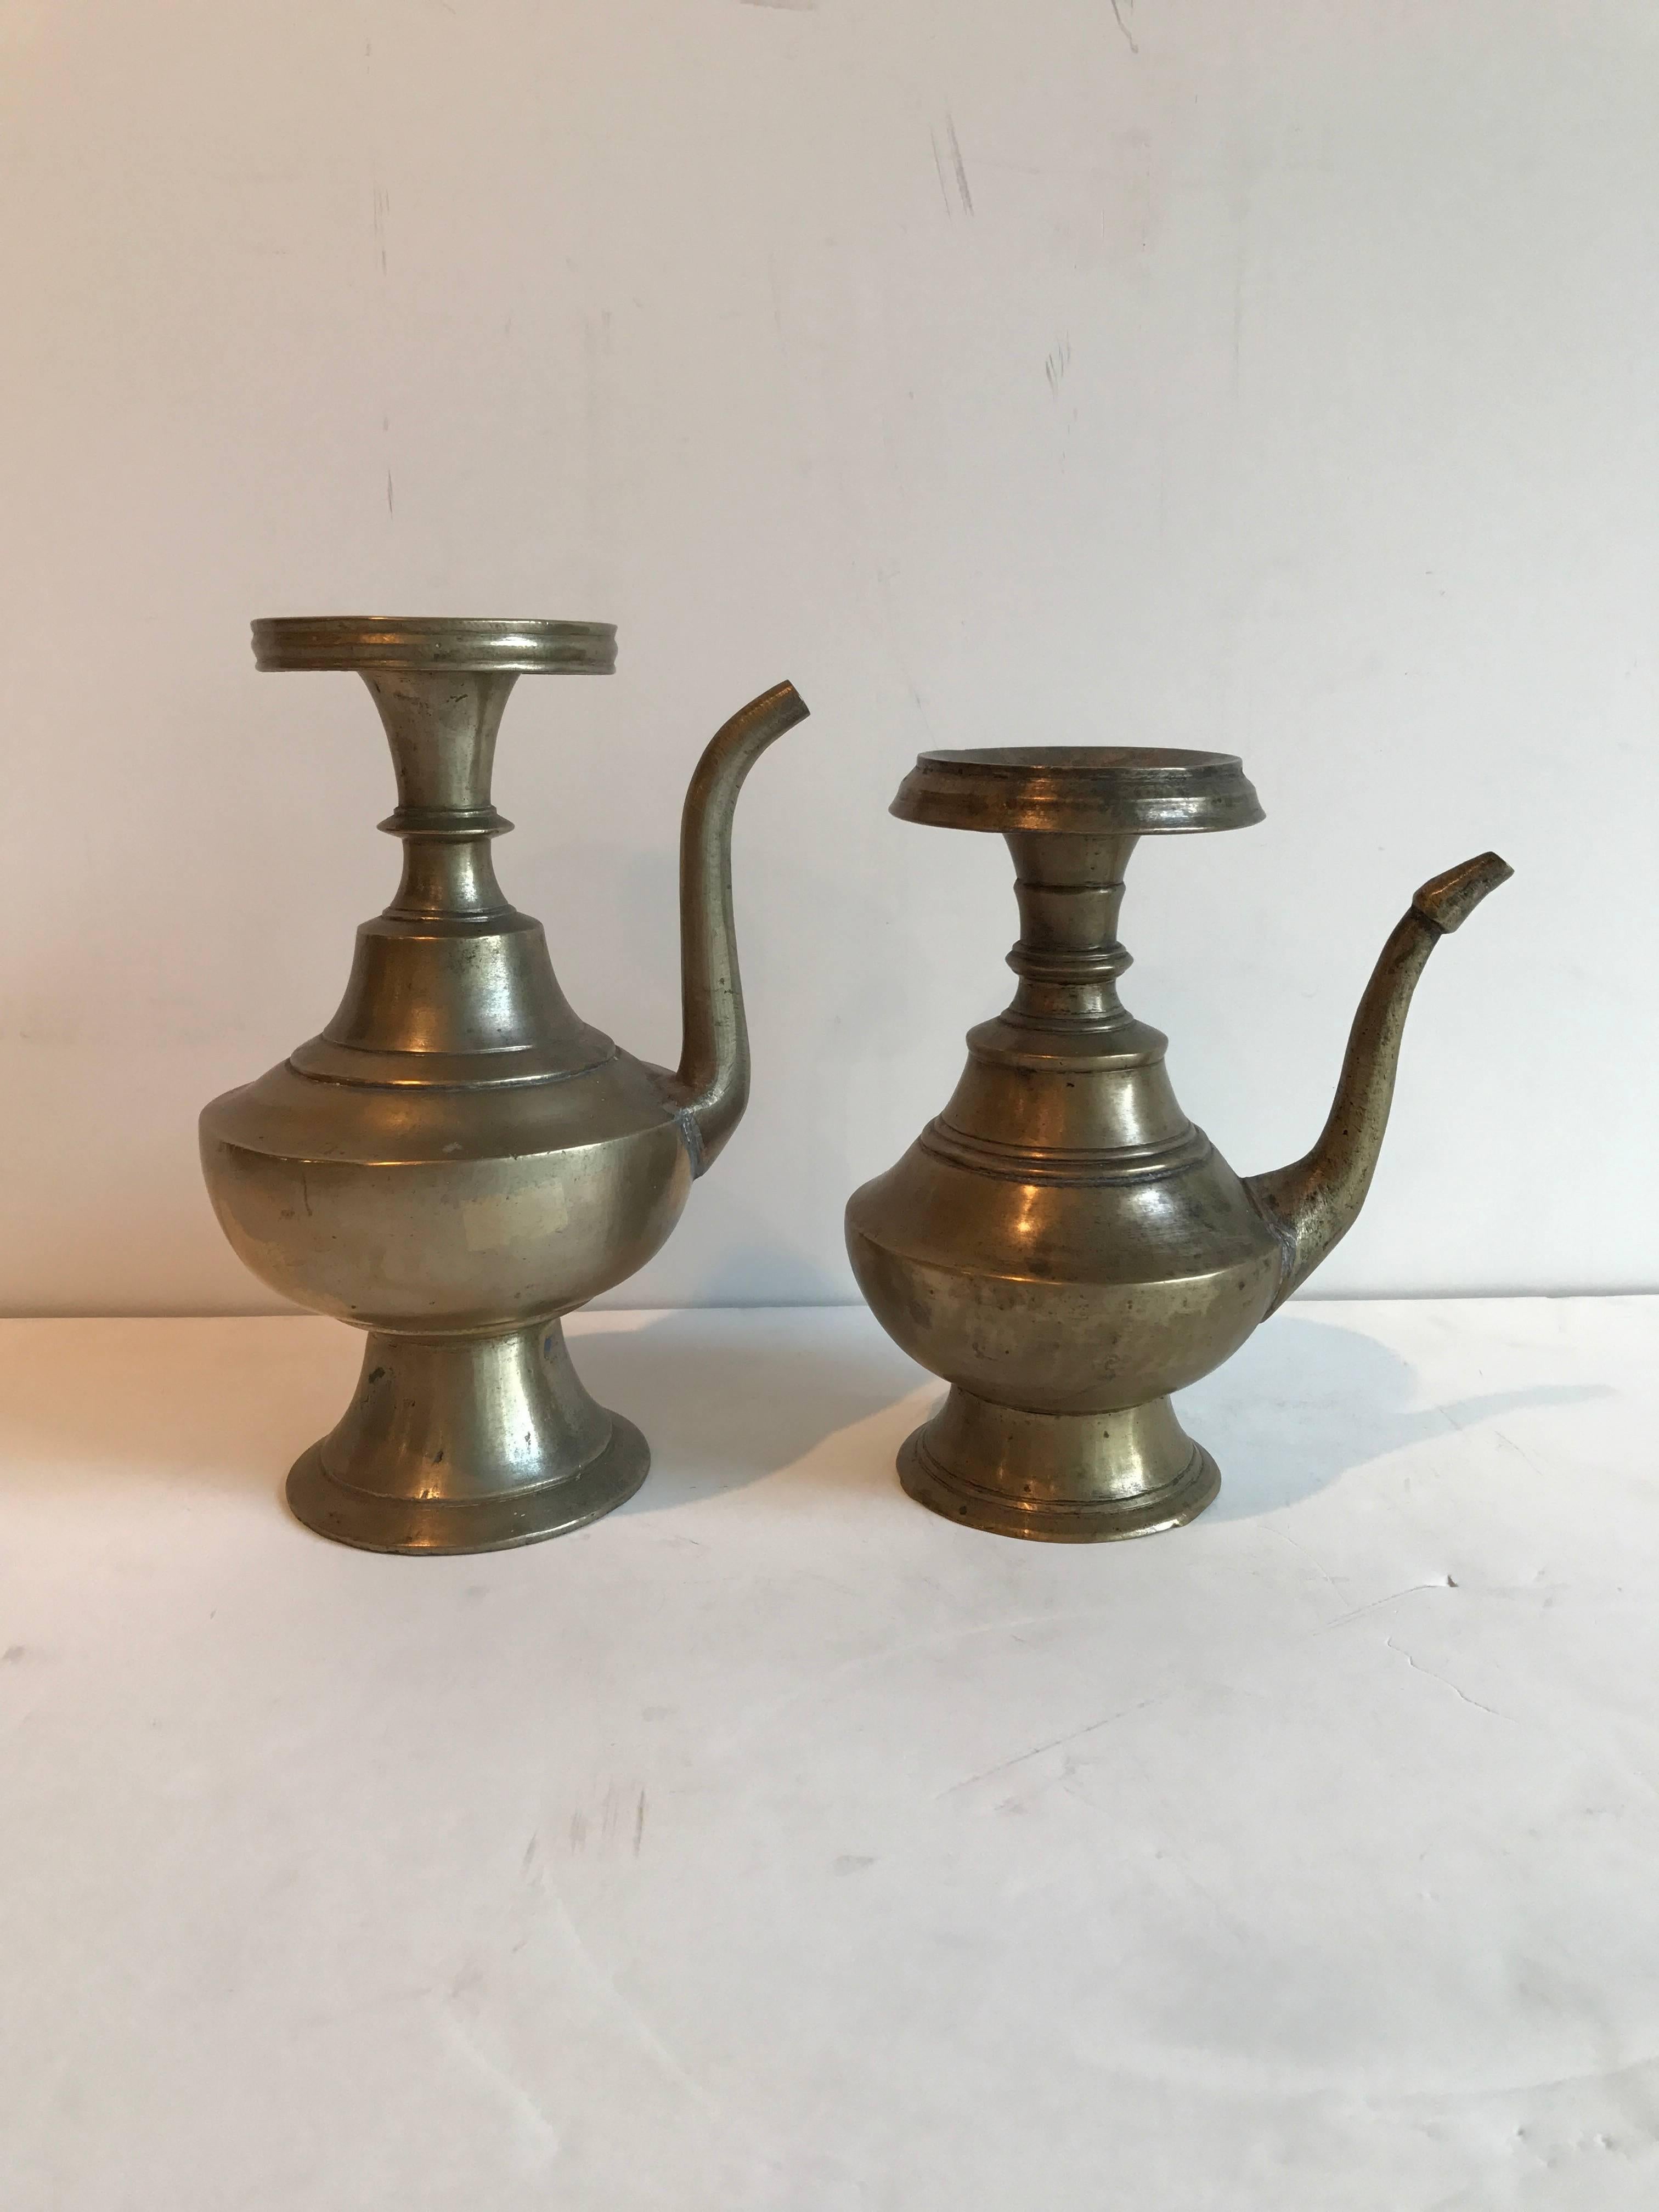 Two classically shaped bronze holy water ewers from the late 19th century. These were used in religious ceremonies in Nepal. 
Dimensions: 
Larger piece: Height:8 diameter:5 .
Smaller piece: Height:7 diameter:3.
HE101.